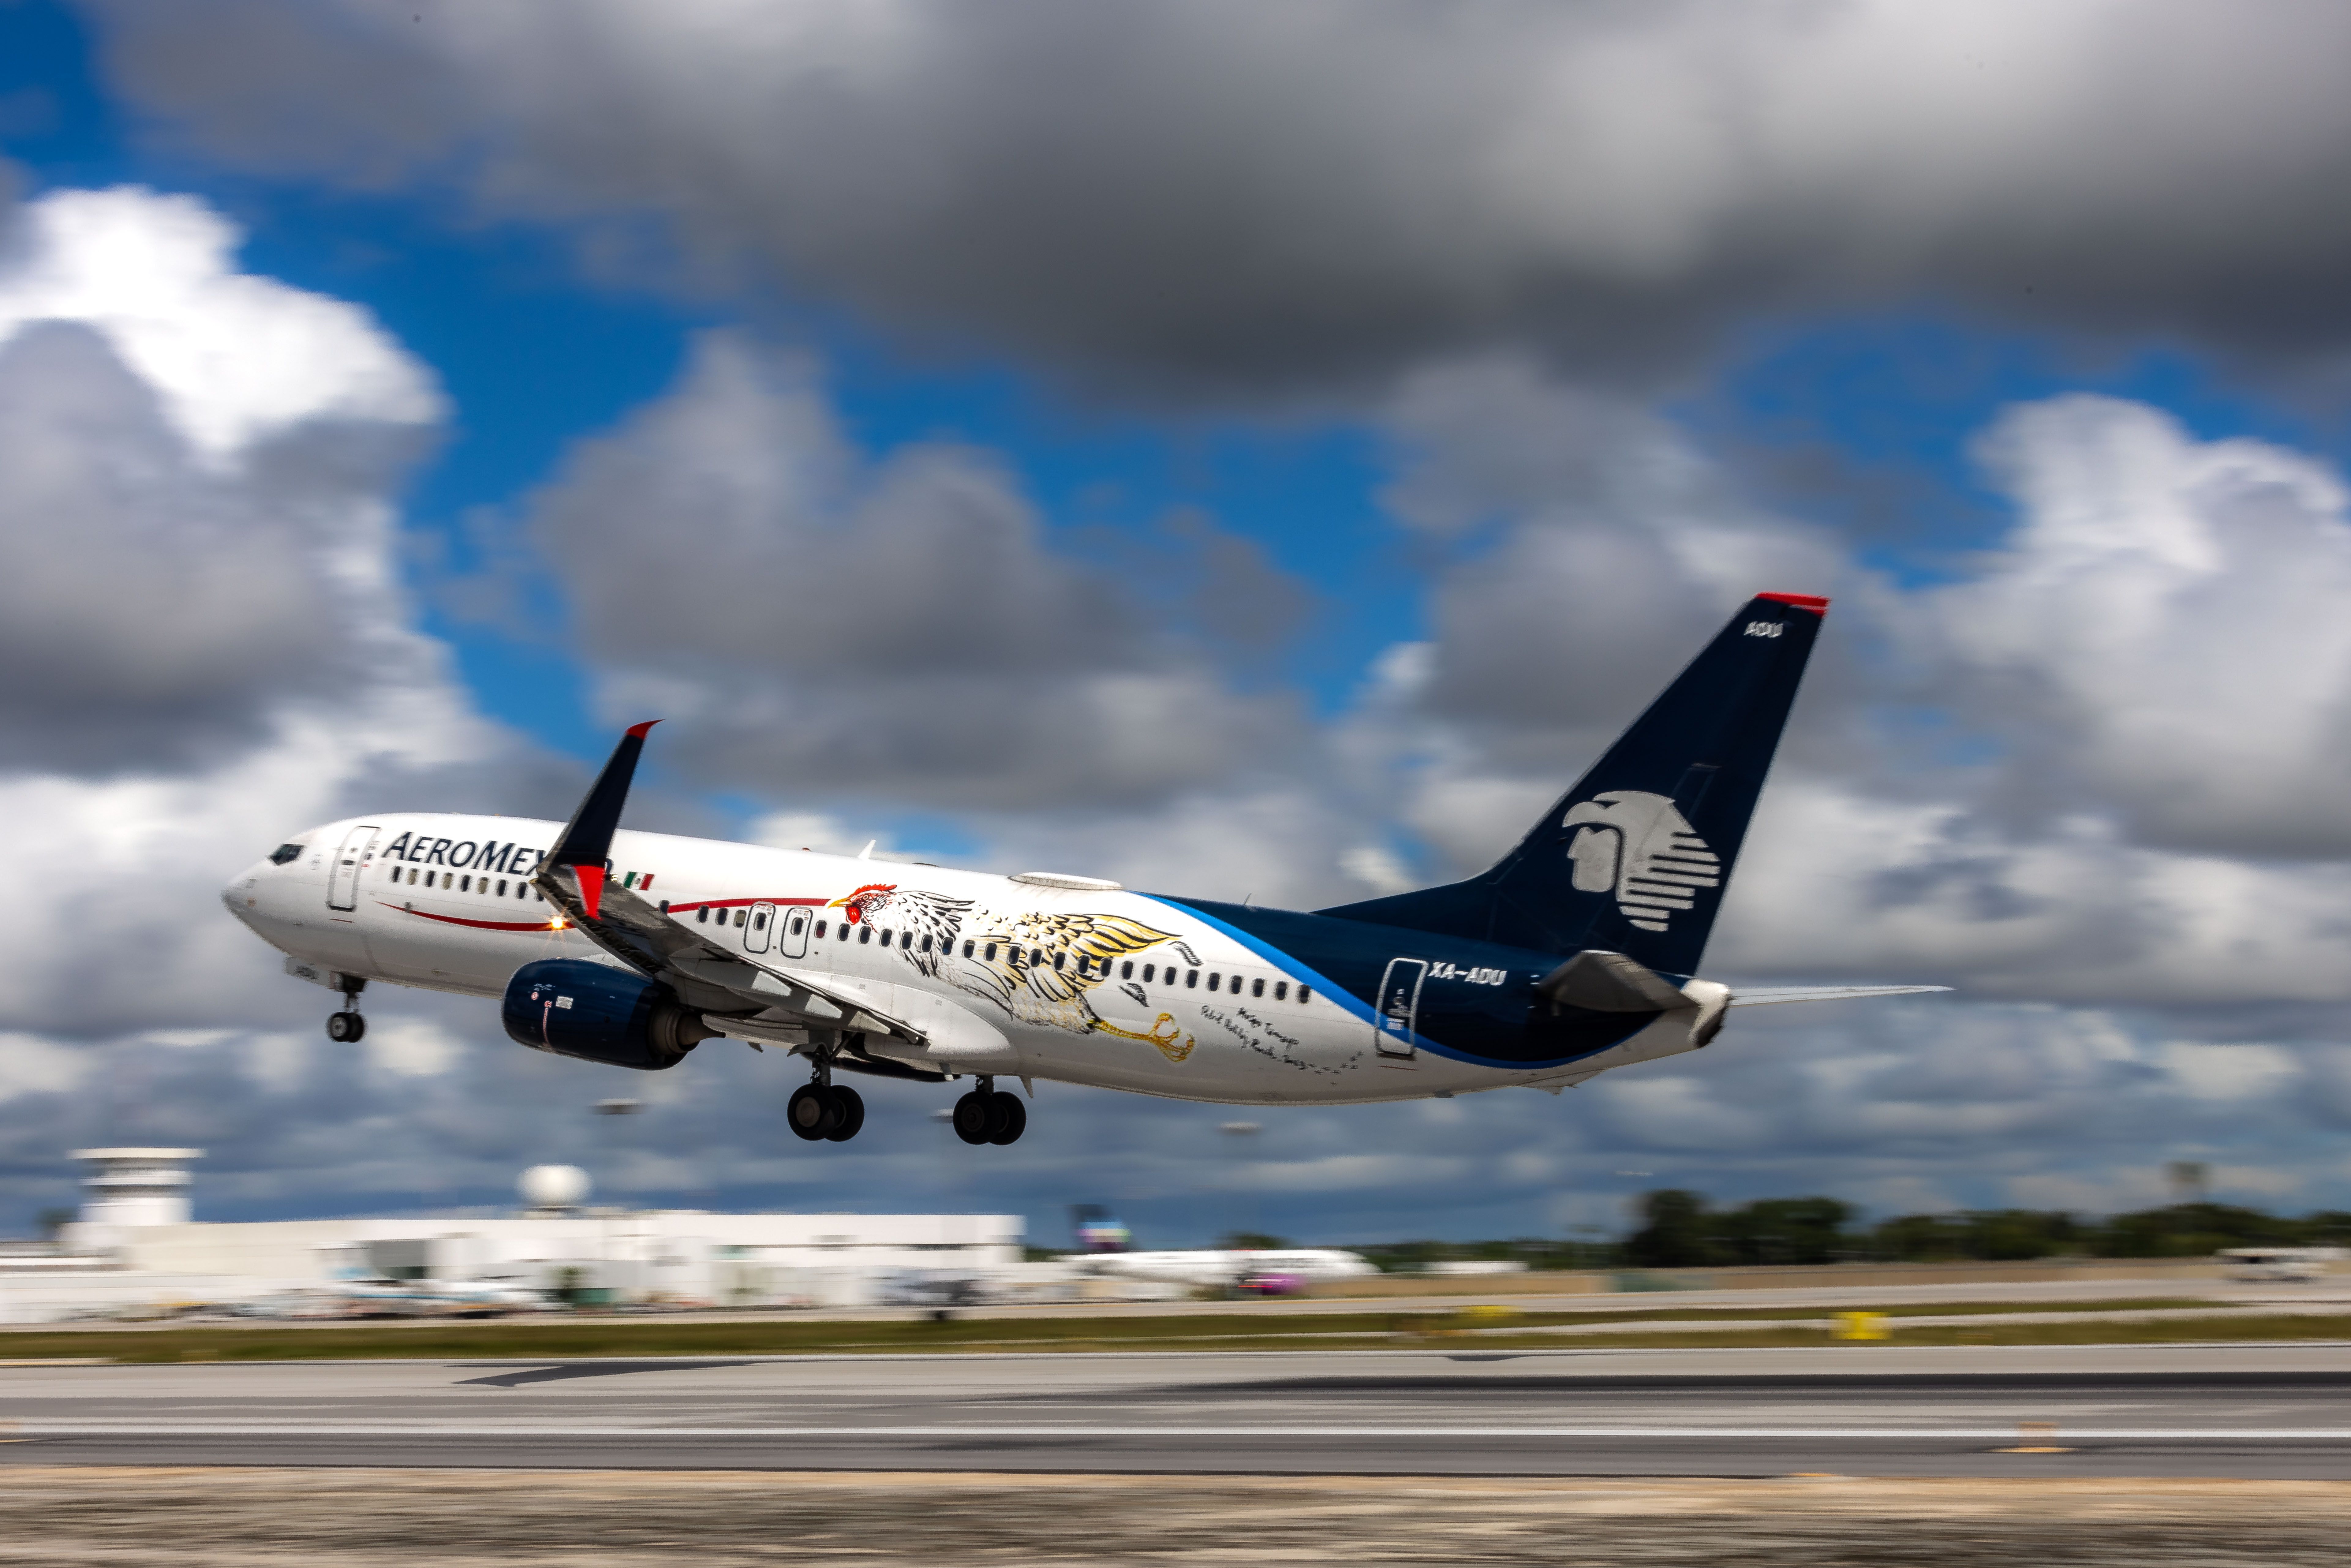 An Aeromexico Boeing 737-800 with a chicken painted on its fuselage